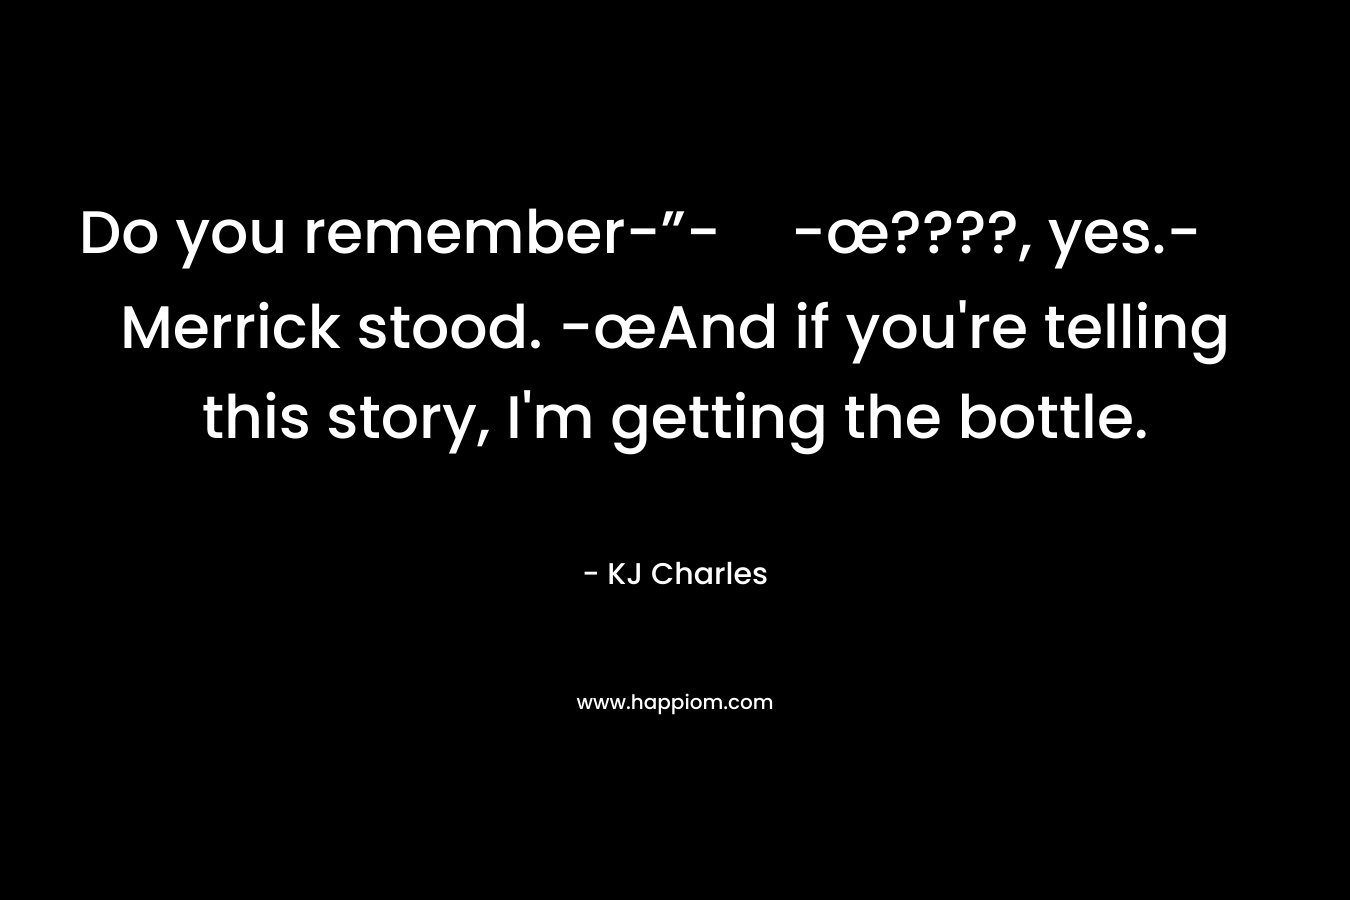 Do you remember-”--œ????, yes.- Merrick stood. -œAnd if you’re telling this story, I’m getting the bottle. – KJ Charles